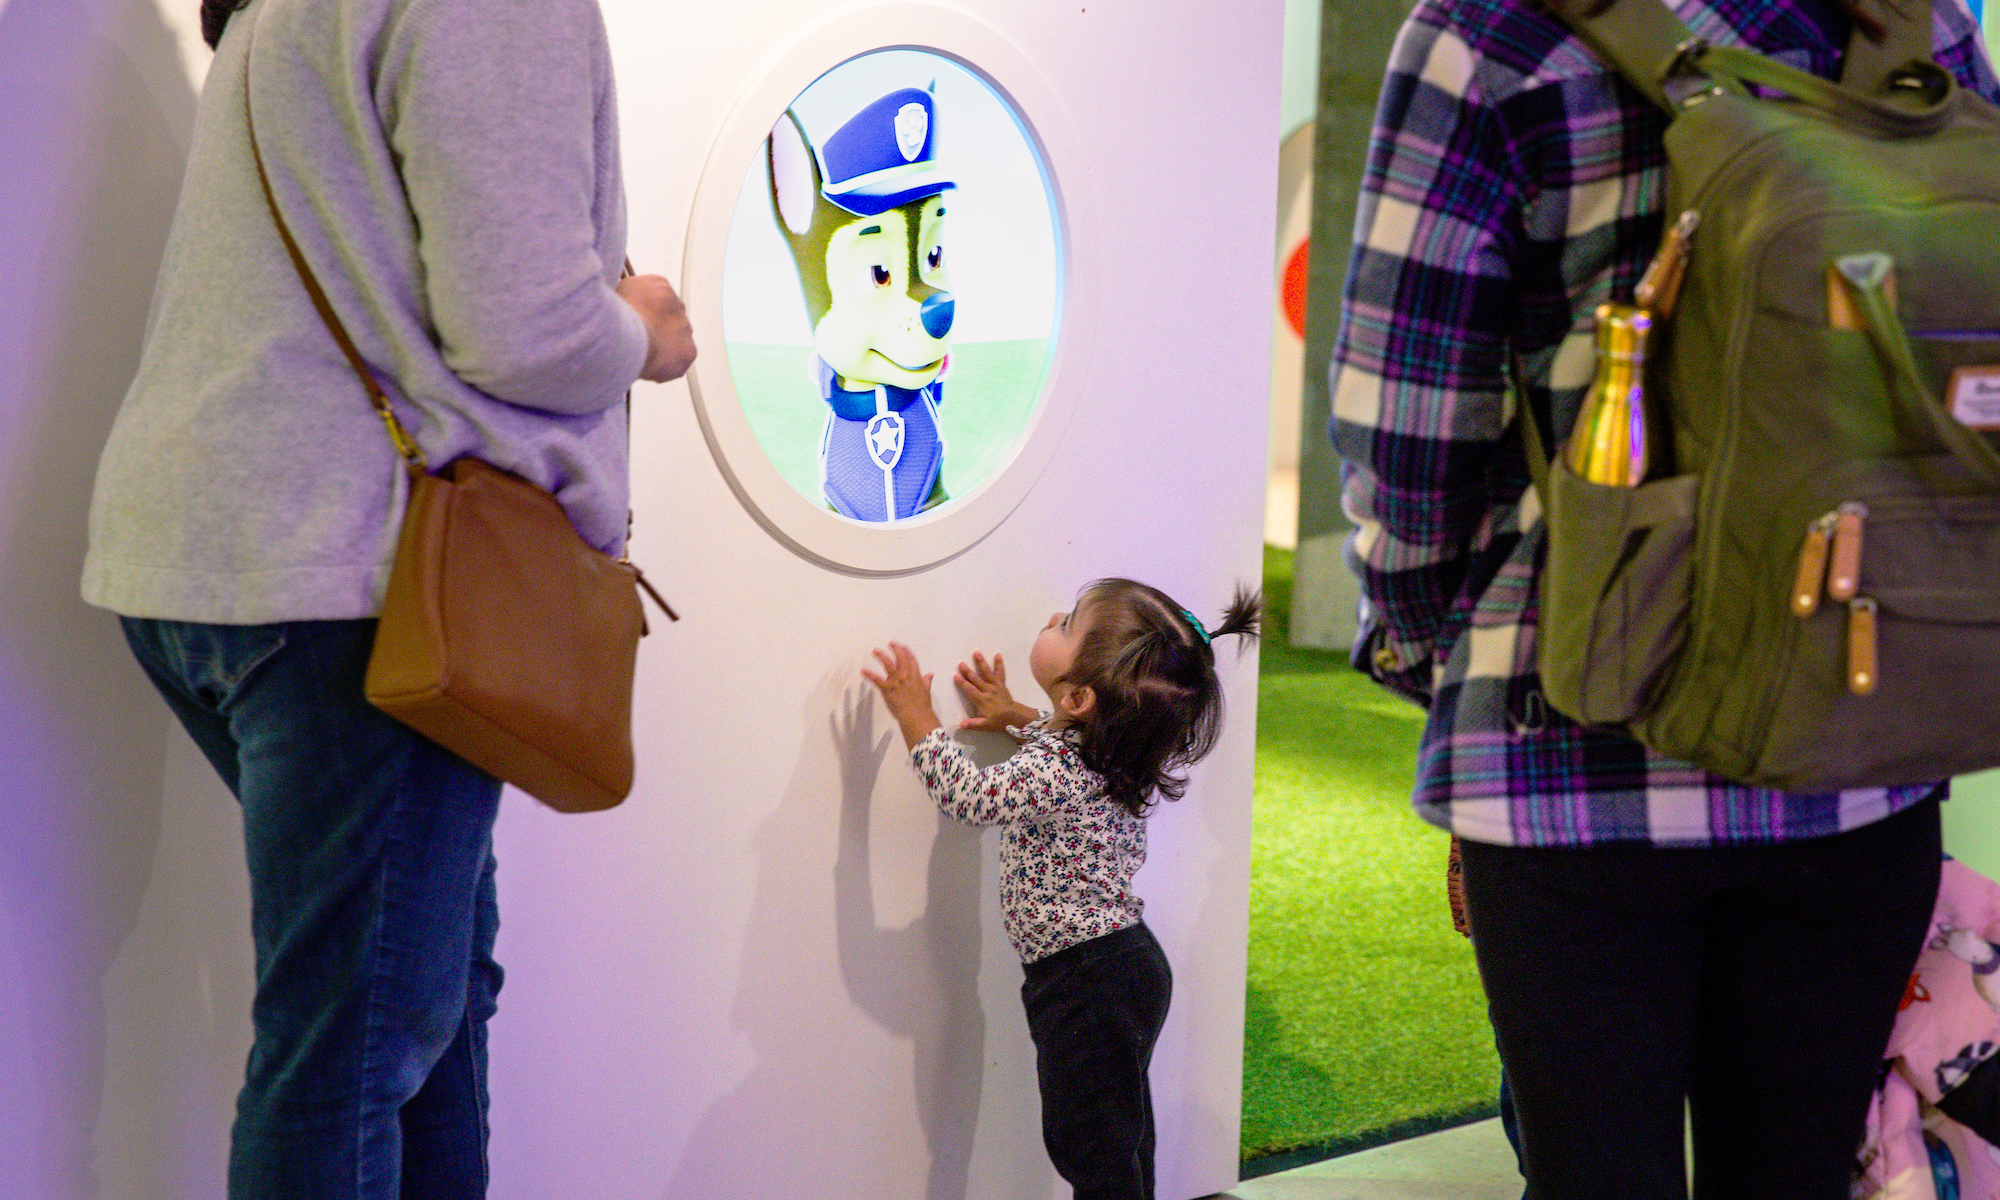 Little girl looking at a paw patrol character in the Art + Tech exhibit